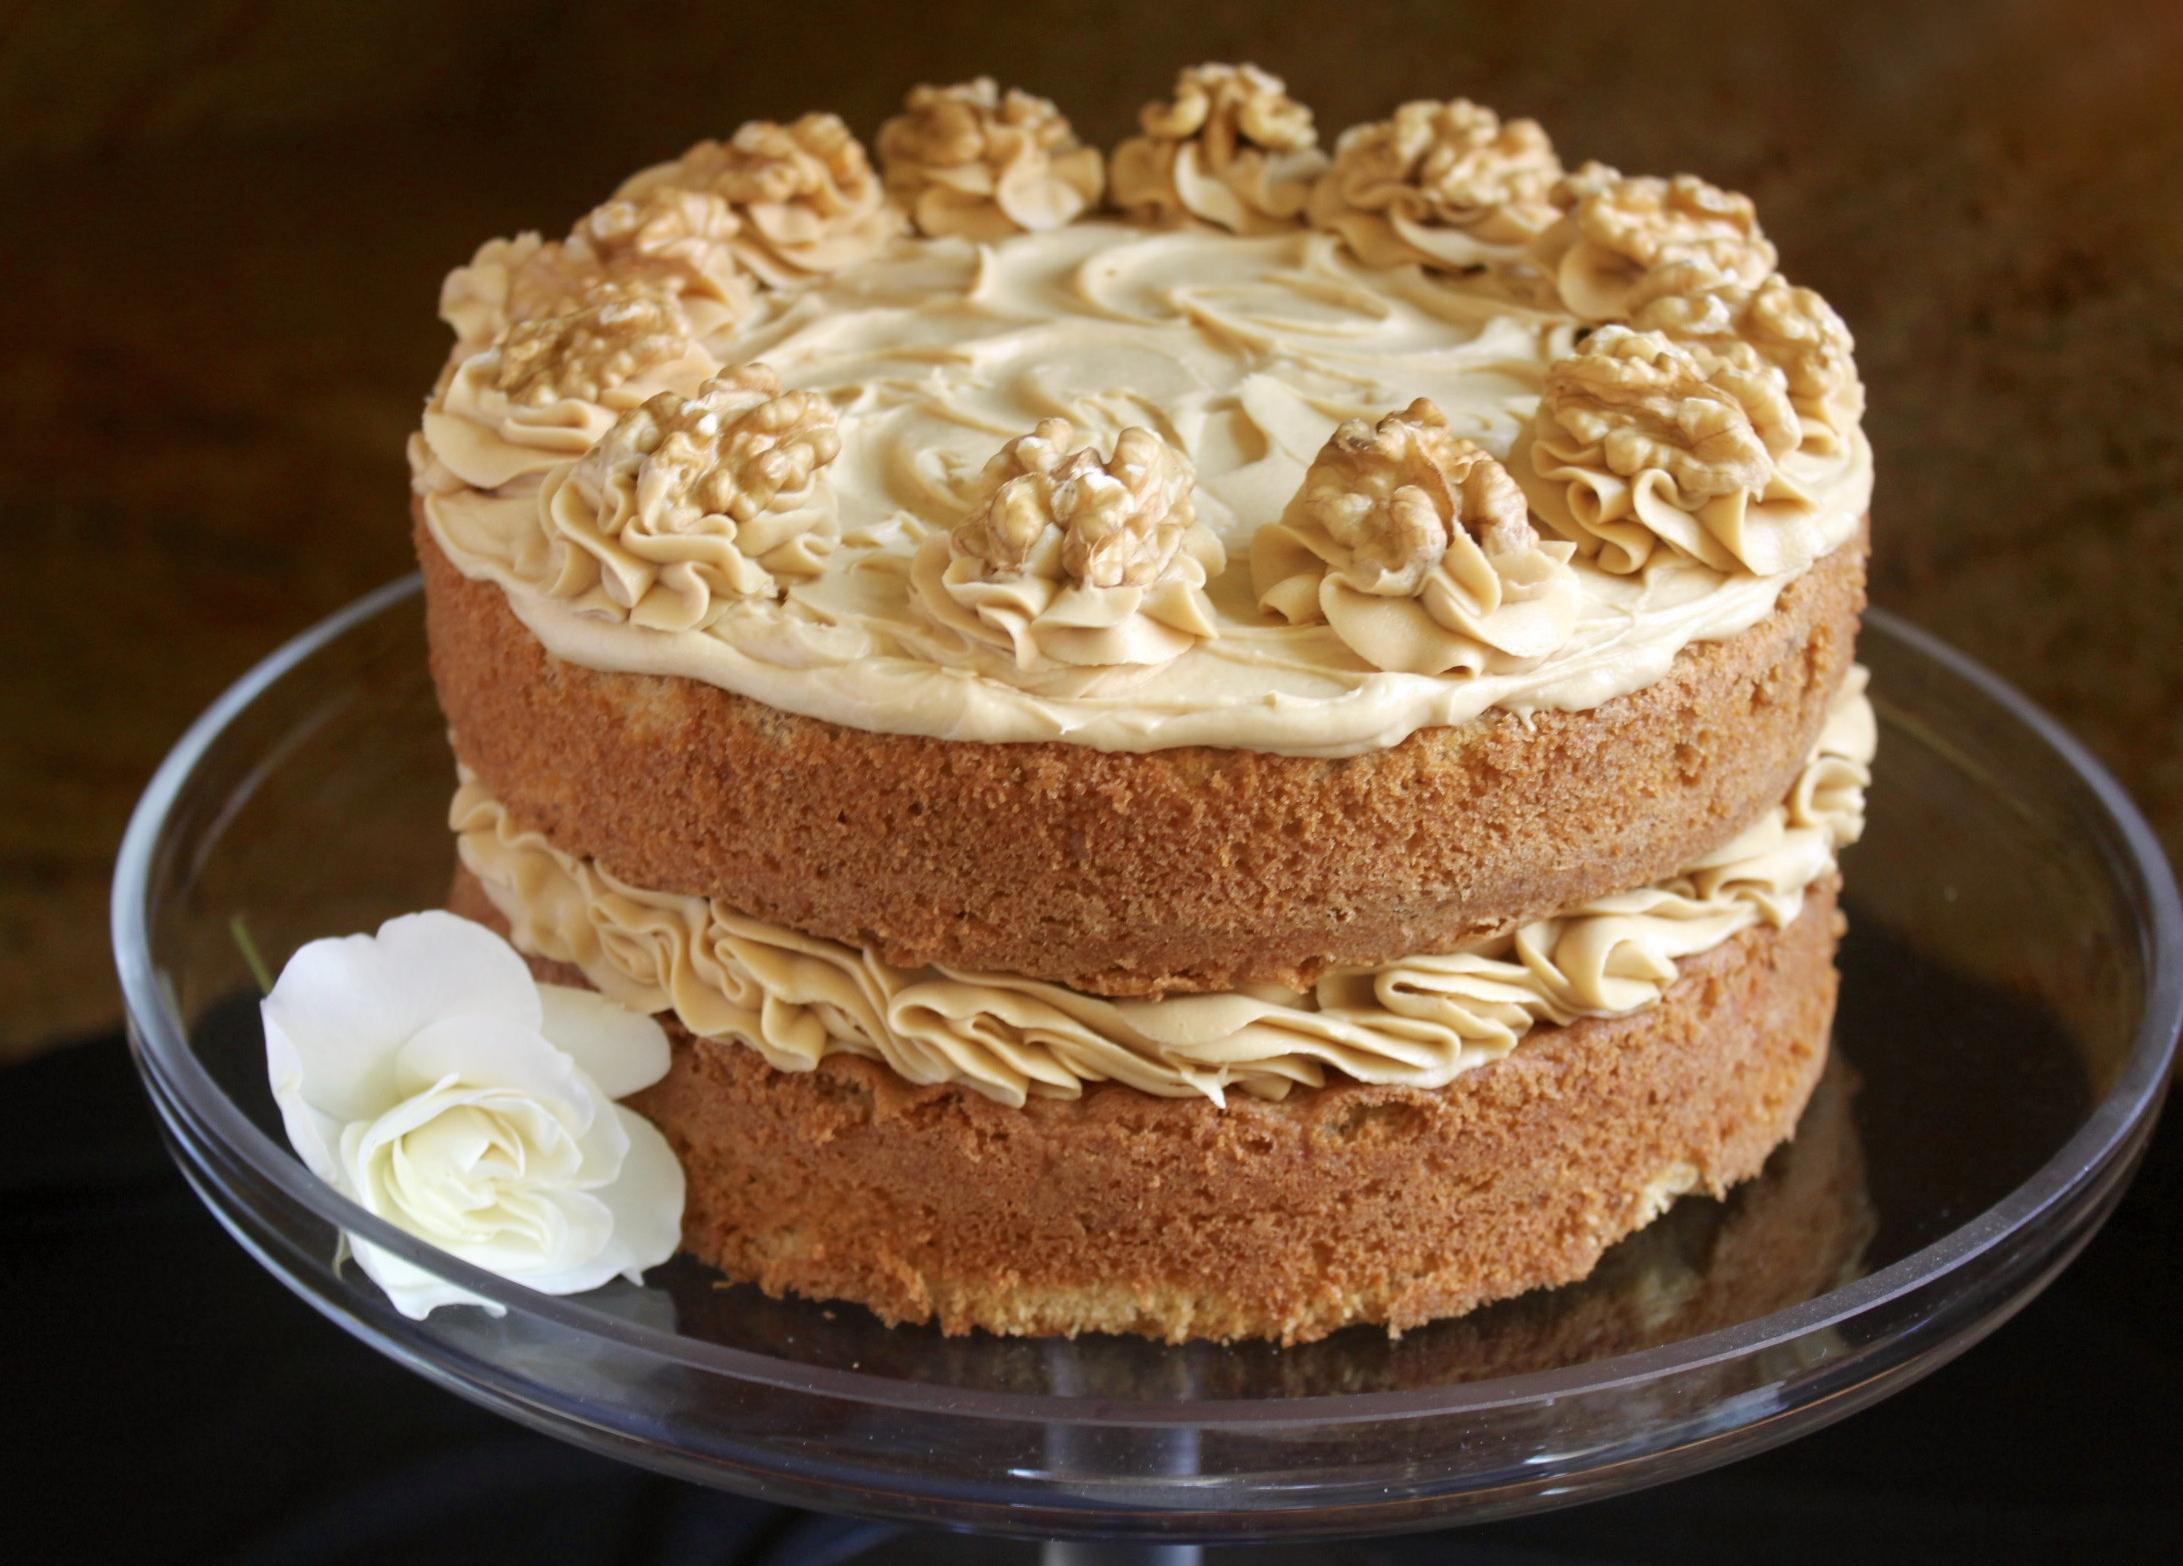  Layers of moist cake, crunchy walnuts, and smooth coffee frosting